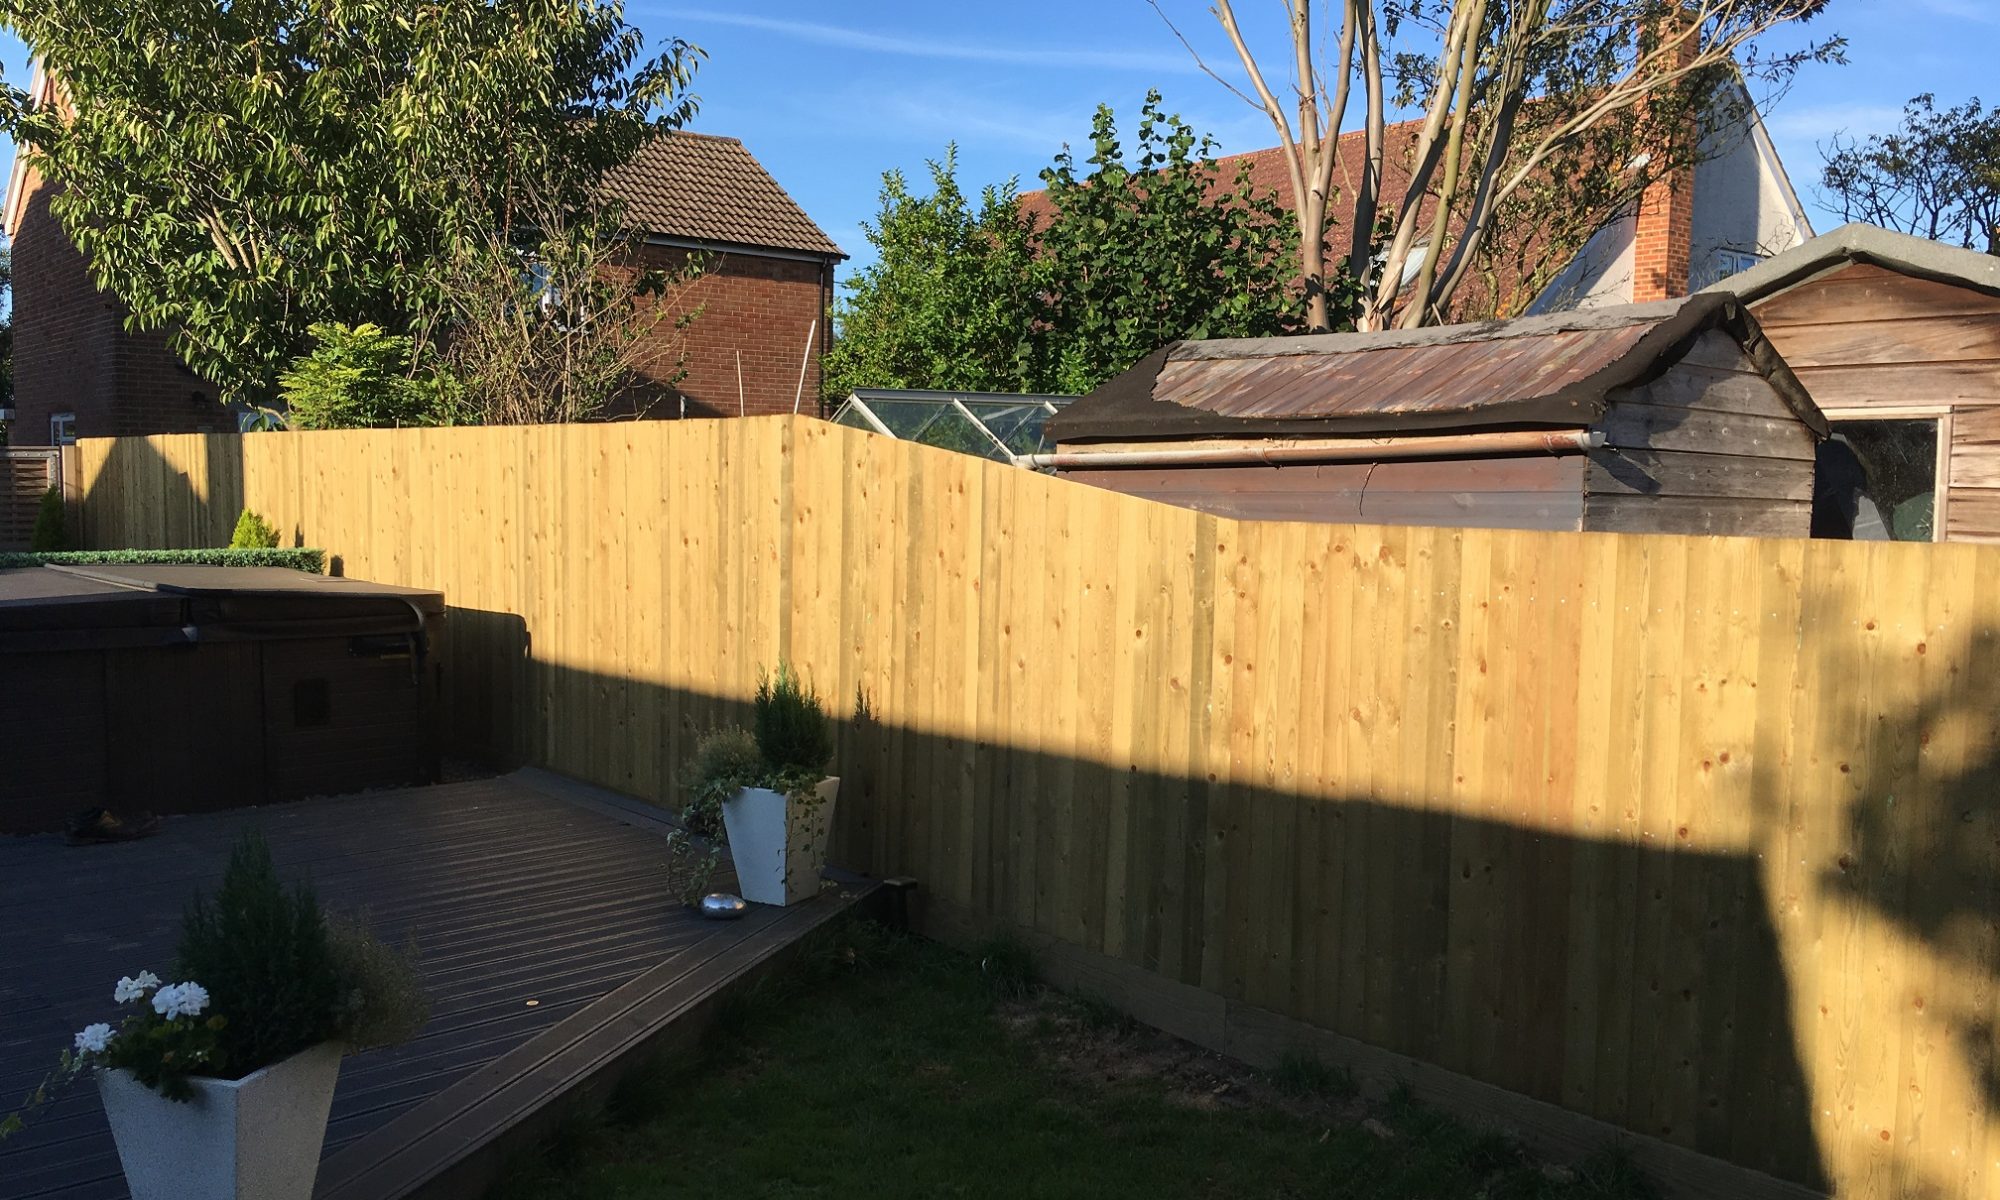 Slope on Featherboard Fence increasing height